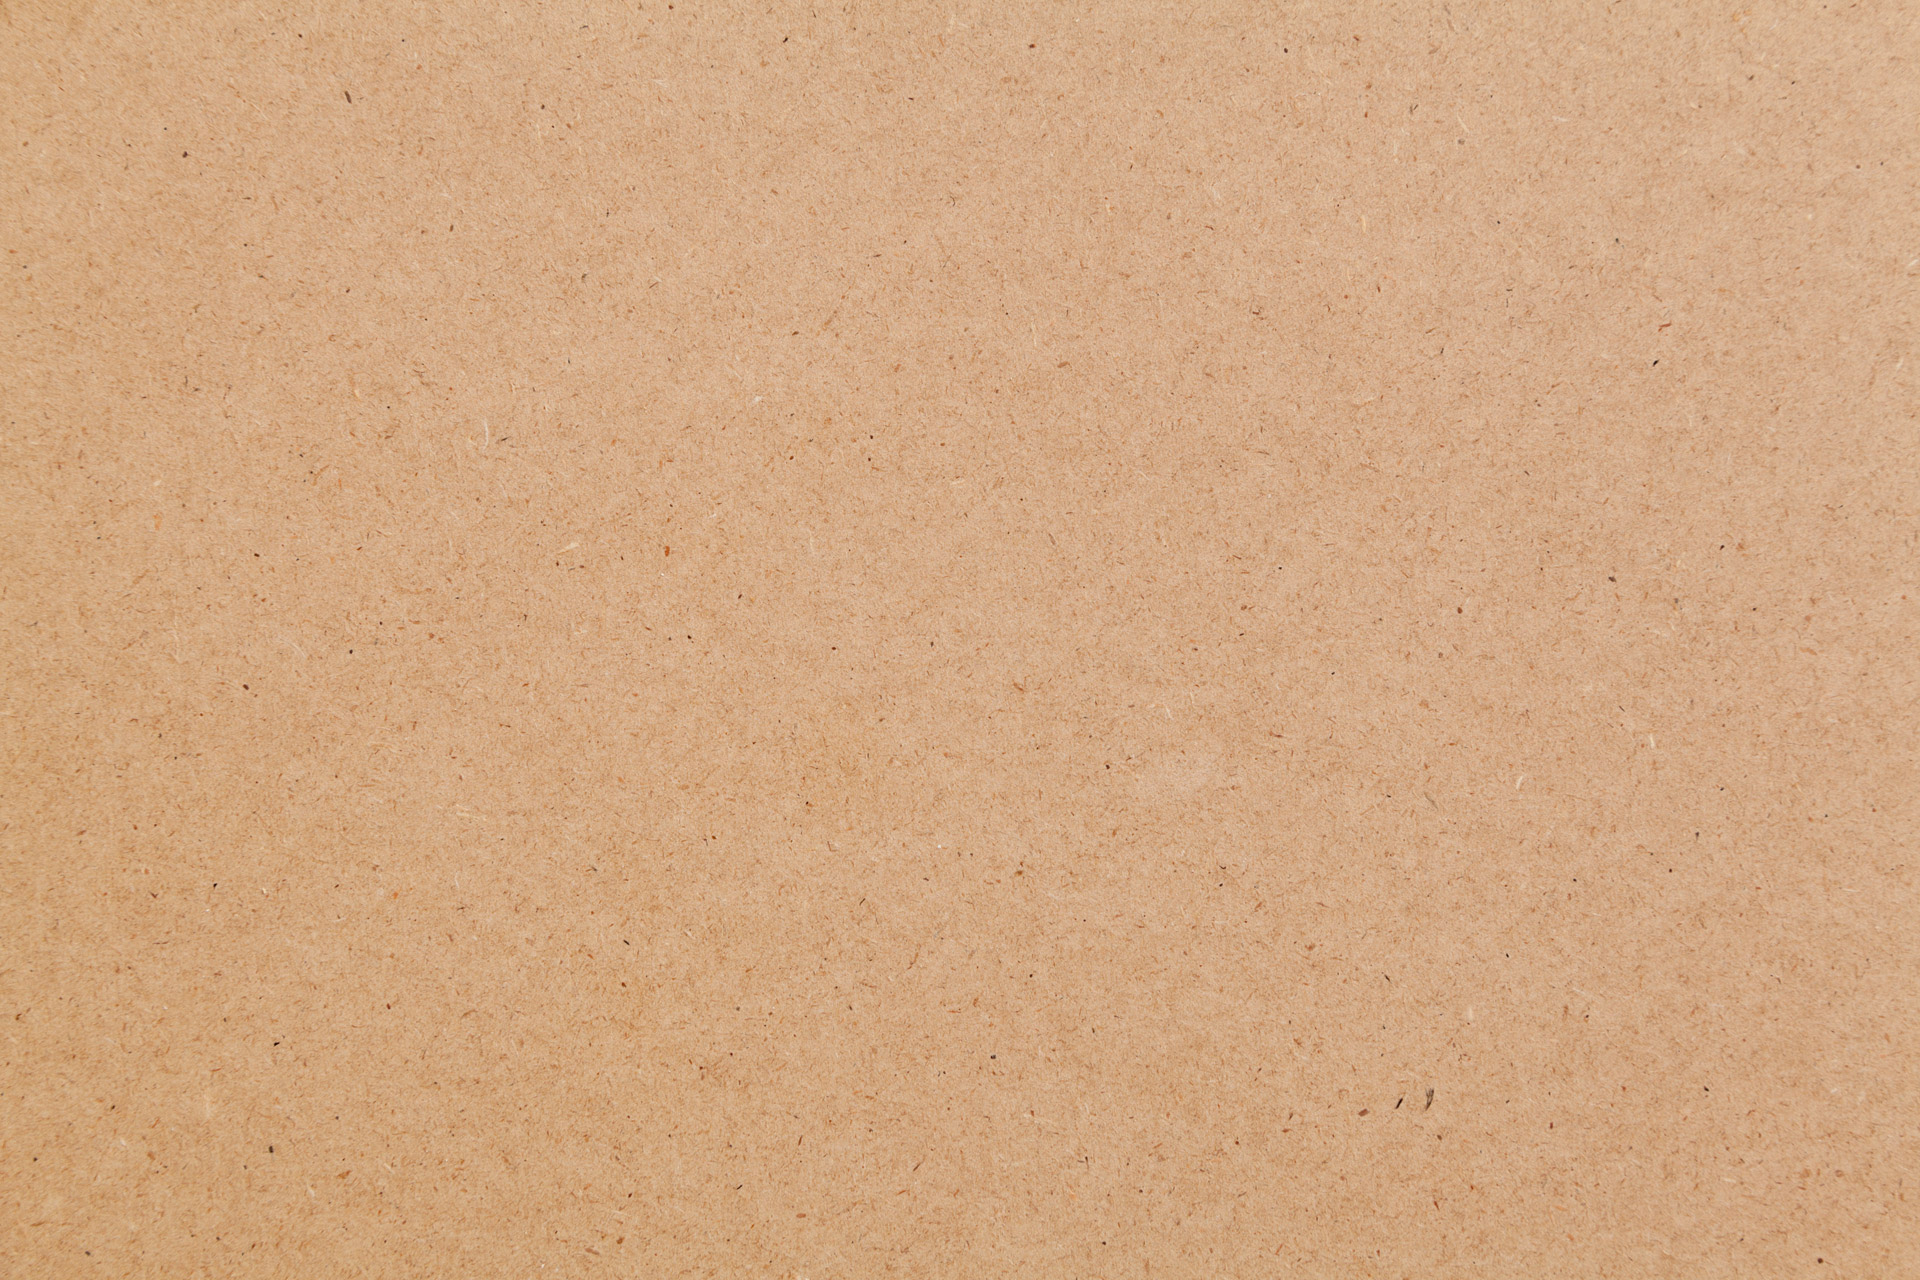 hard-paper-texture-free-stock-photo-public-domain-pictures